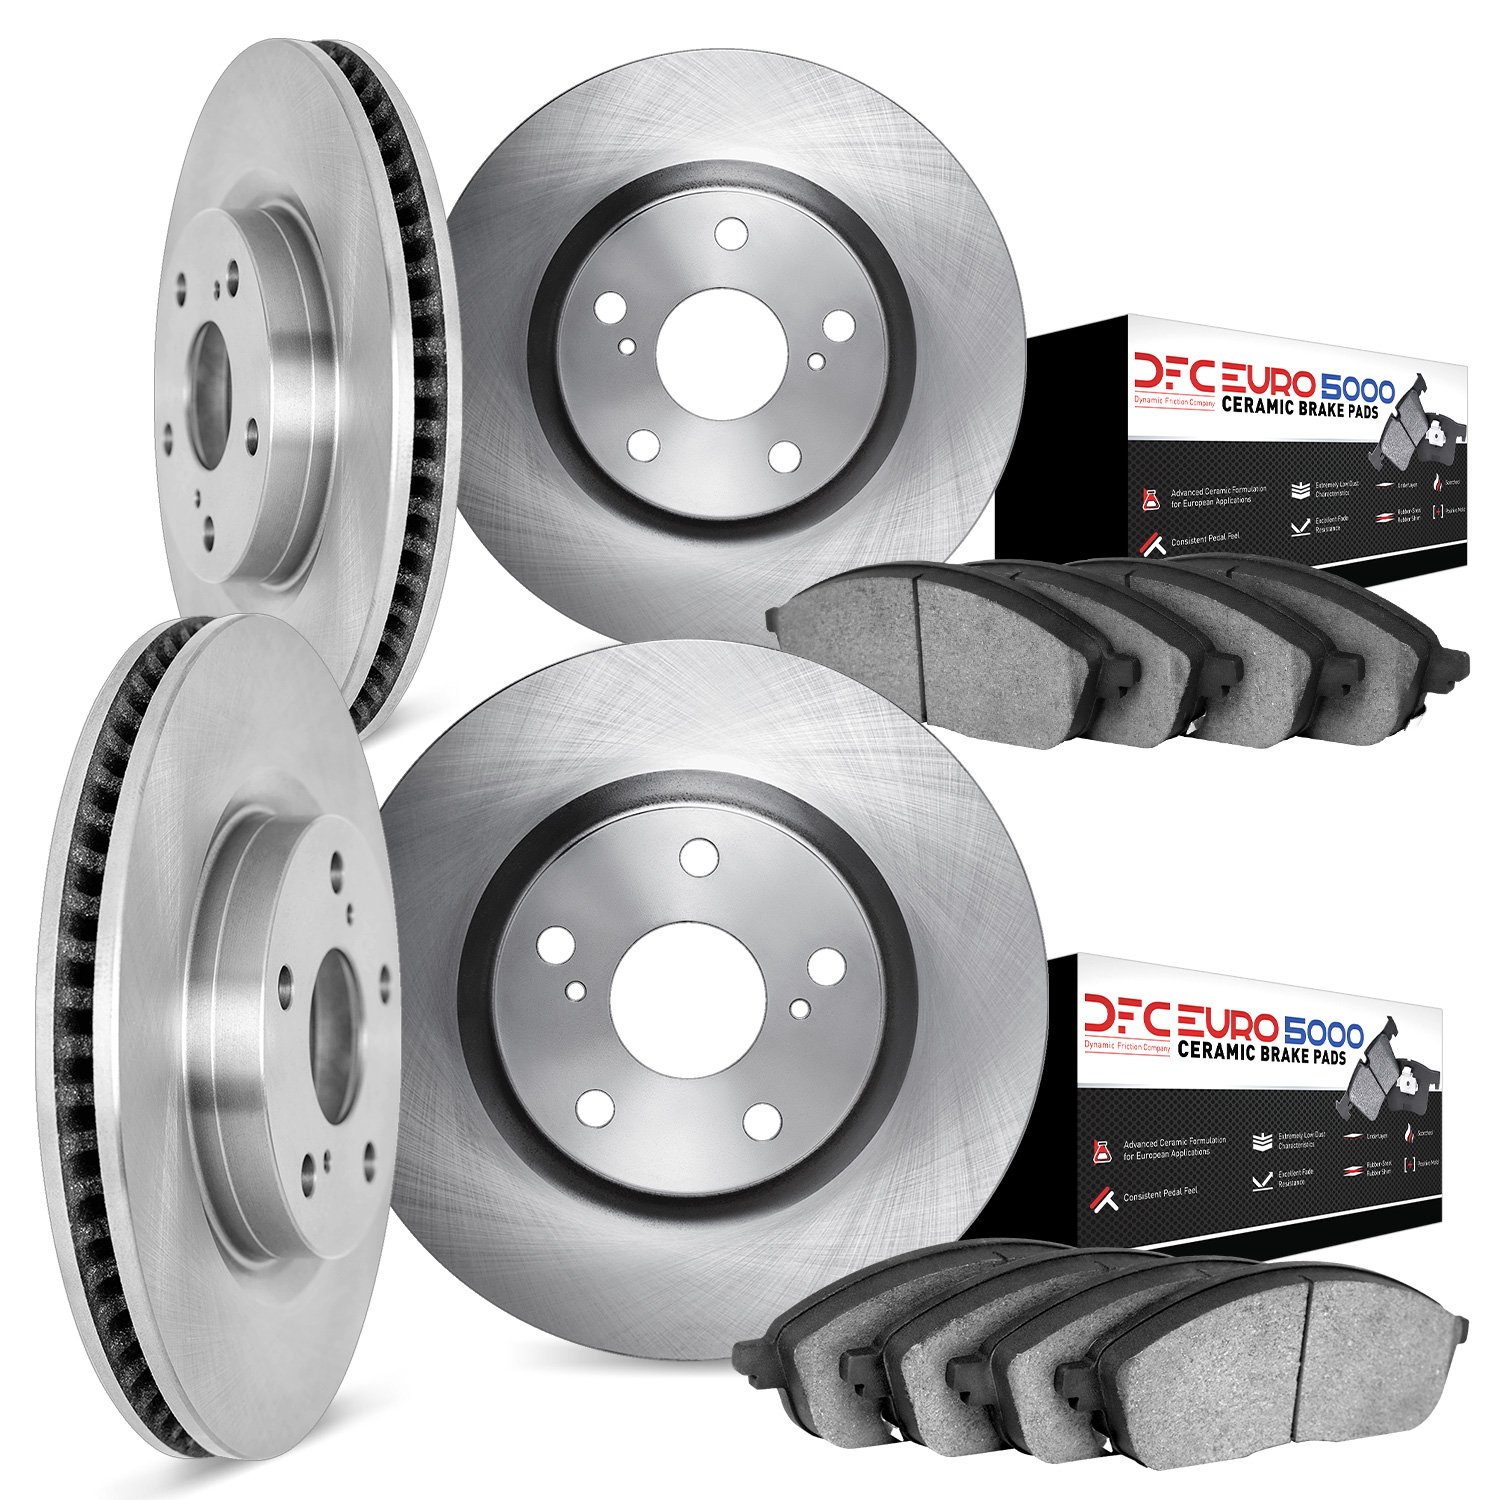 6604-31006 Brake Rotors w/5000 Euro Ceramic Brake Pads, 1988-1994 BMW, Position: Front and Rear